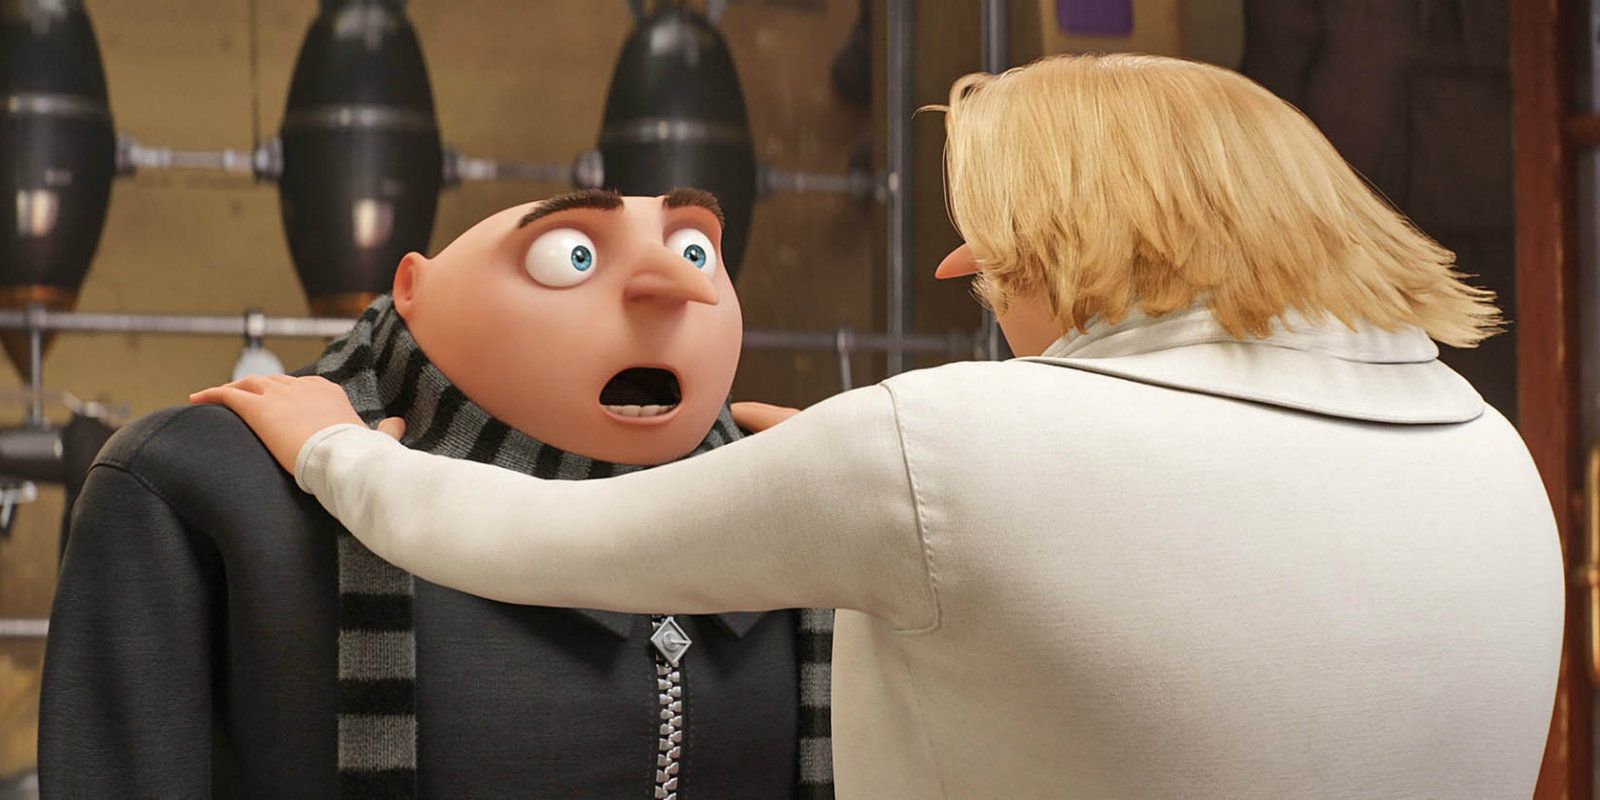 Dru with his hands on Dru's shoulders in Despicable Me 3